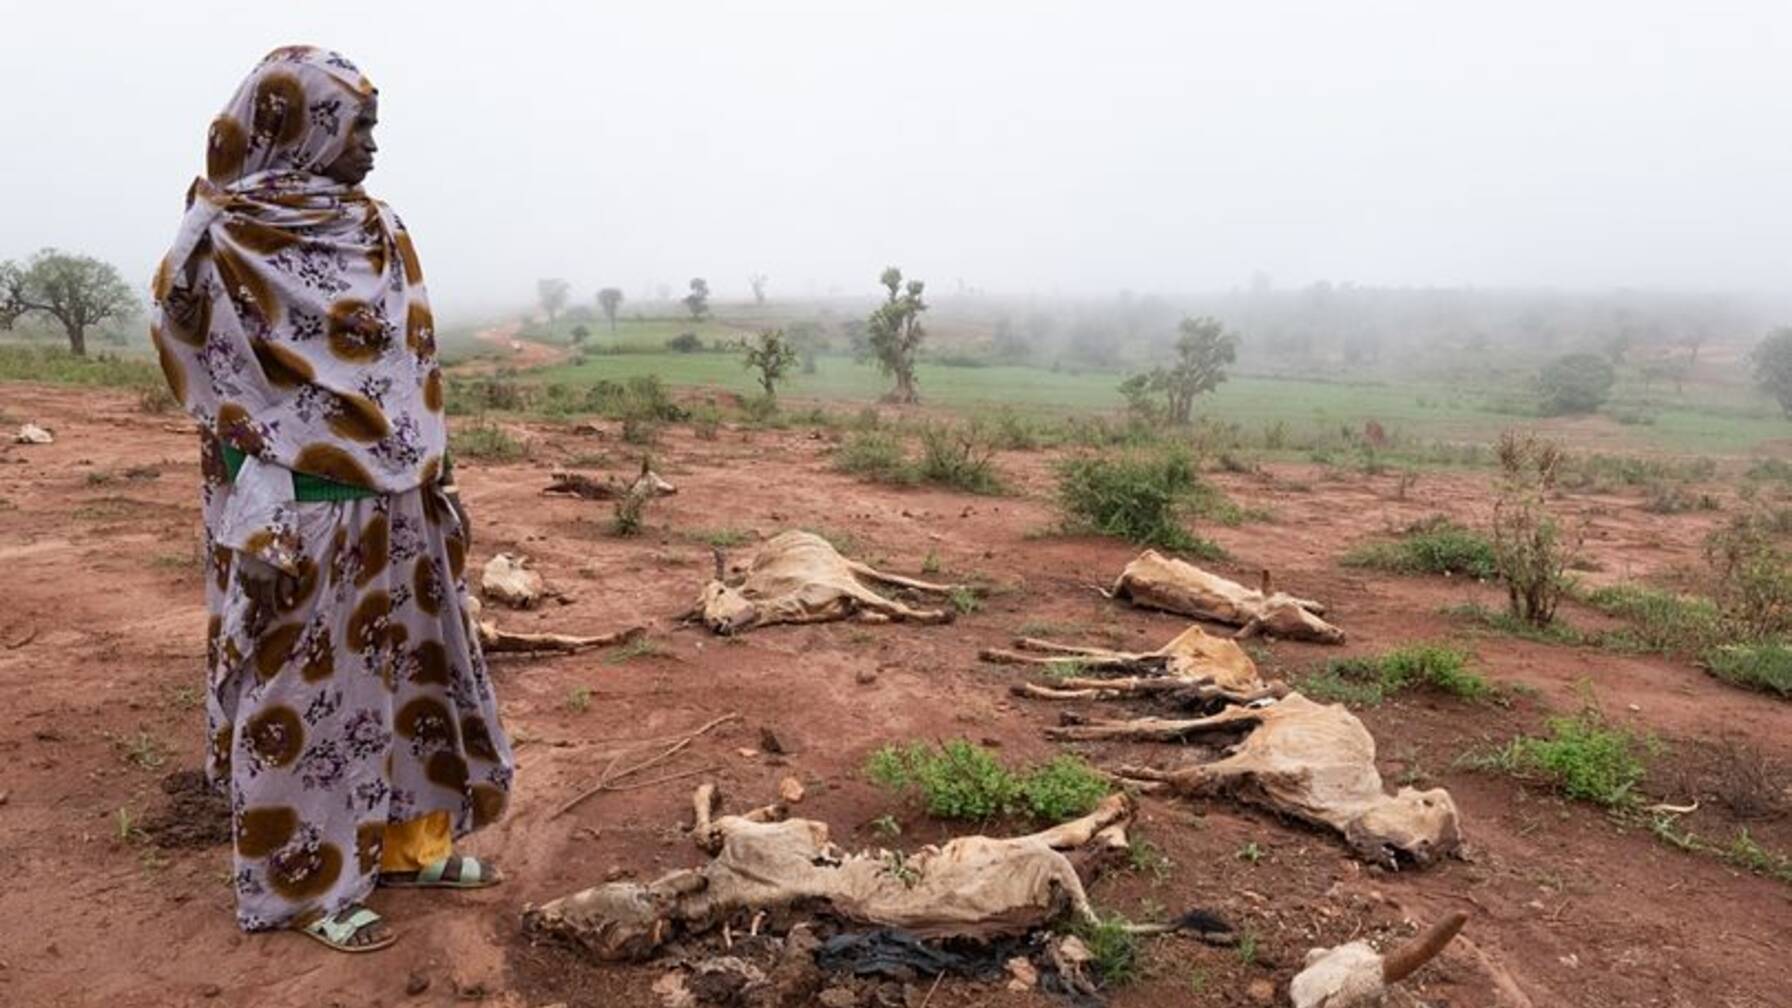 Ensane Aga from the neighbouring village also lost all her cows.